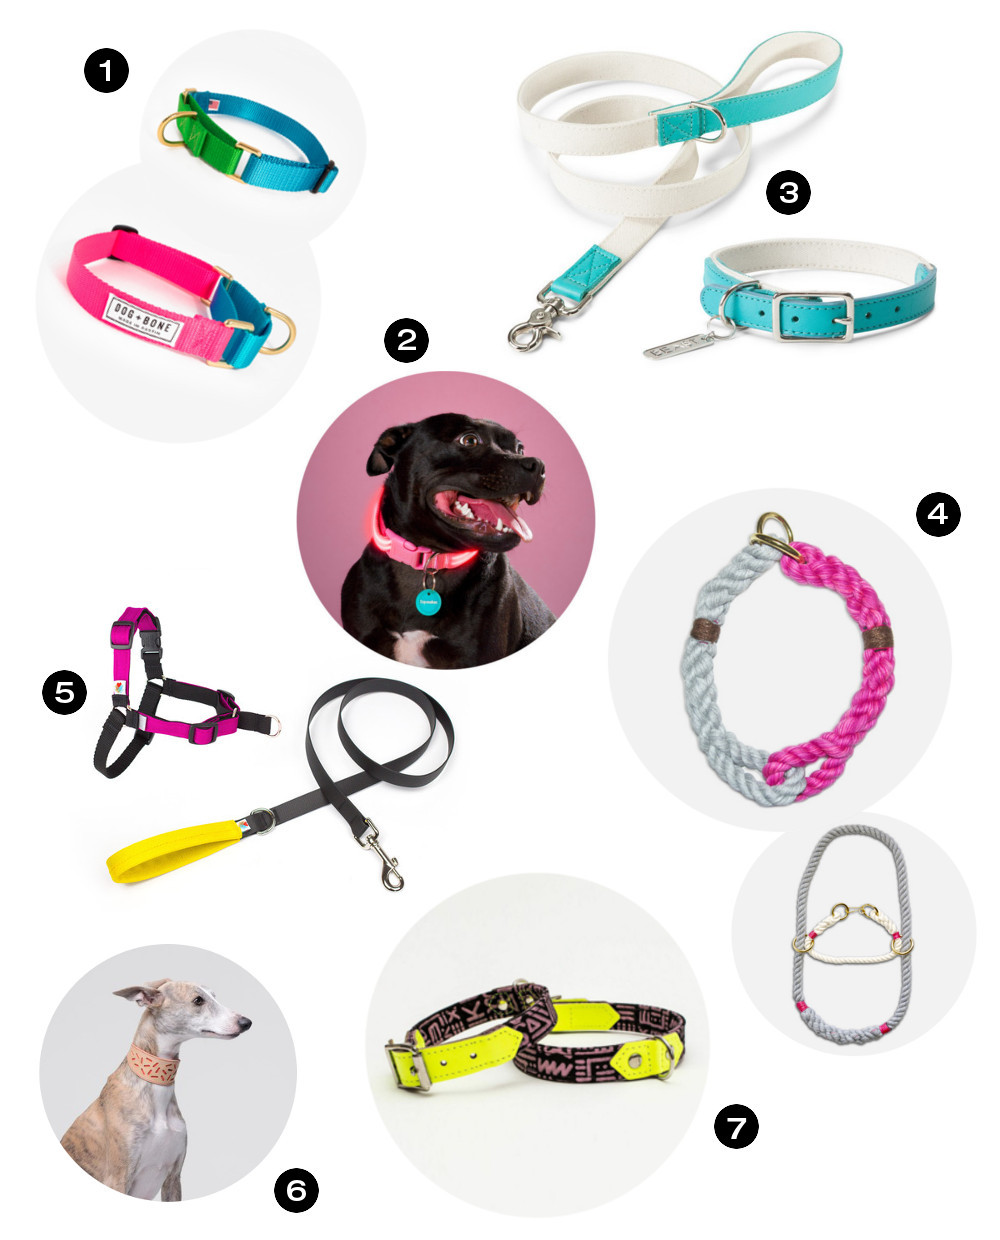 Dog Milk Holiday Gift Guide: 24 Stylish Collars, Leashes, and Harnesses